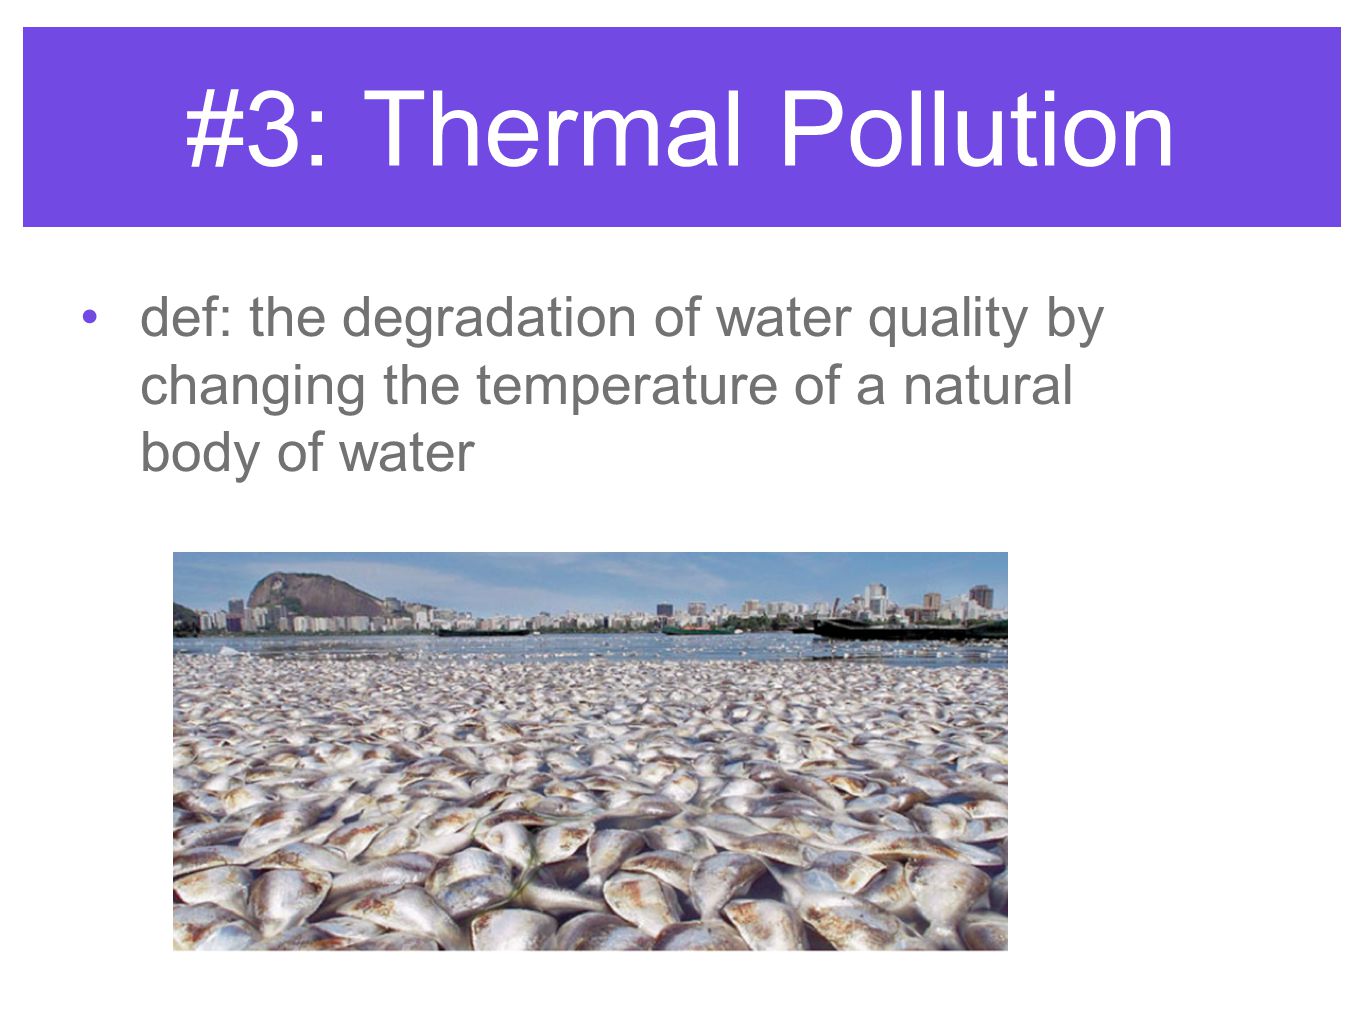 #3: Thermal Pollution def: the degradation of water quality by changing the temperature of a natural body of water.